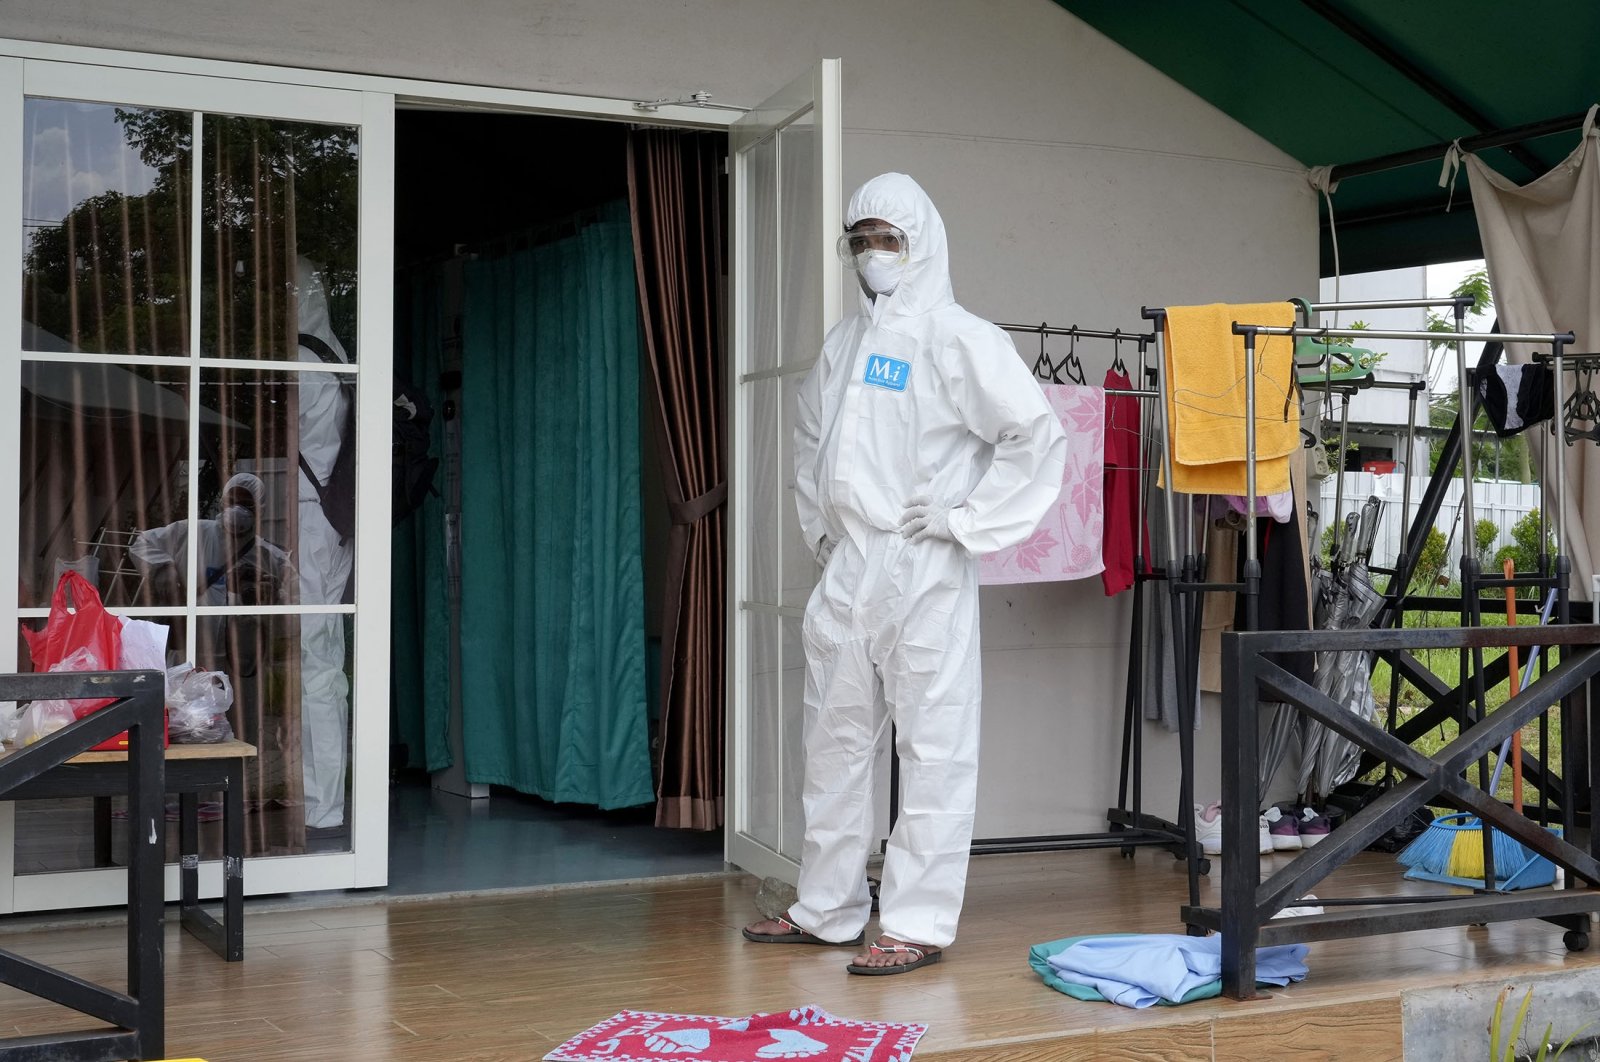 A health worker stands outside a treating room for COVID-19 patient at an isolation center in Tangerang, on the outskirts of Jakarta, Indonesia, Feb. 3, 2022. (AP Photo)